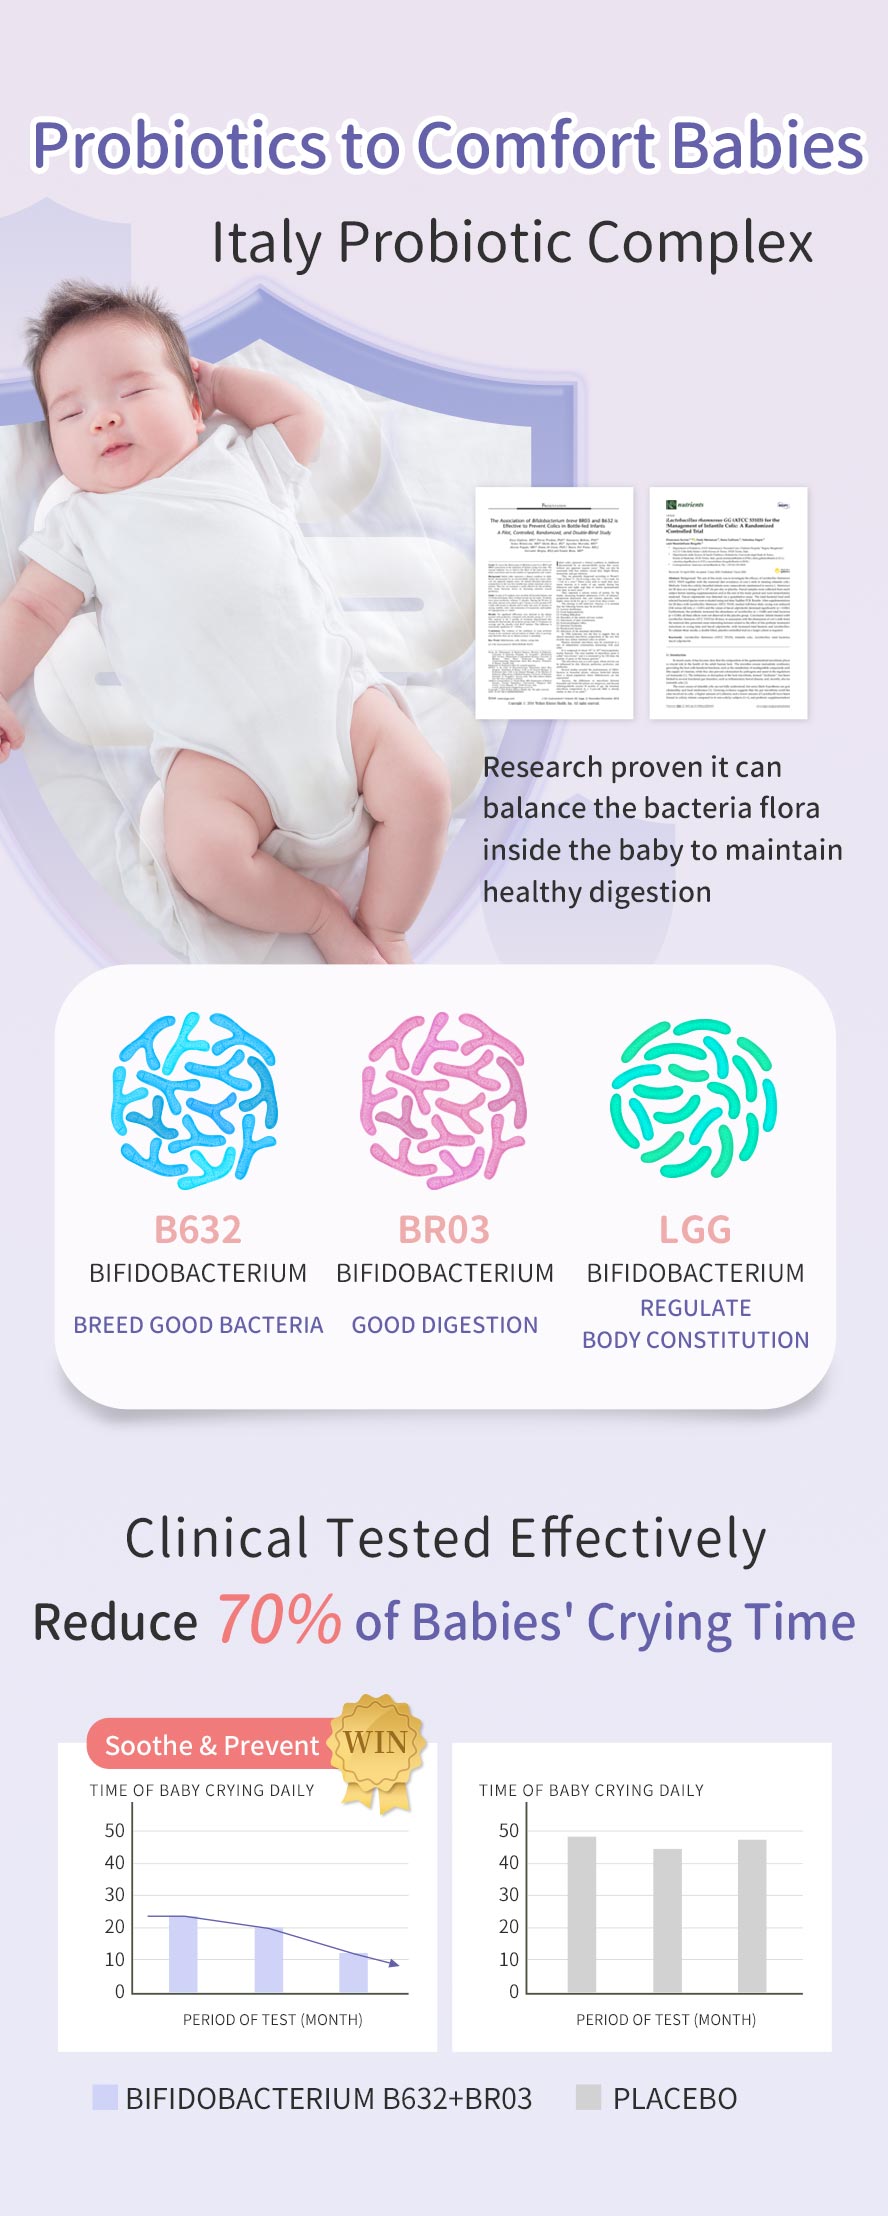 BHK's Baby Probiotic Powder uses Italian Probitotic complex to breed good bacteria for excellent digestion, and regulate body constitution which can effectively reduce 70% of babies' crying time.